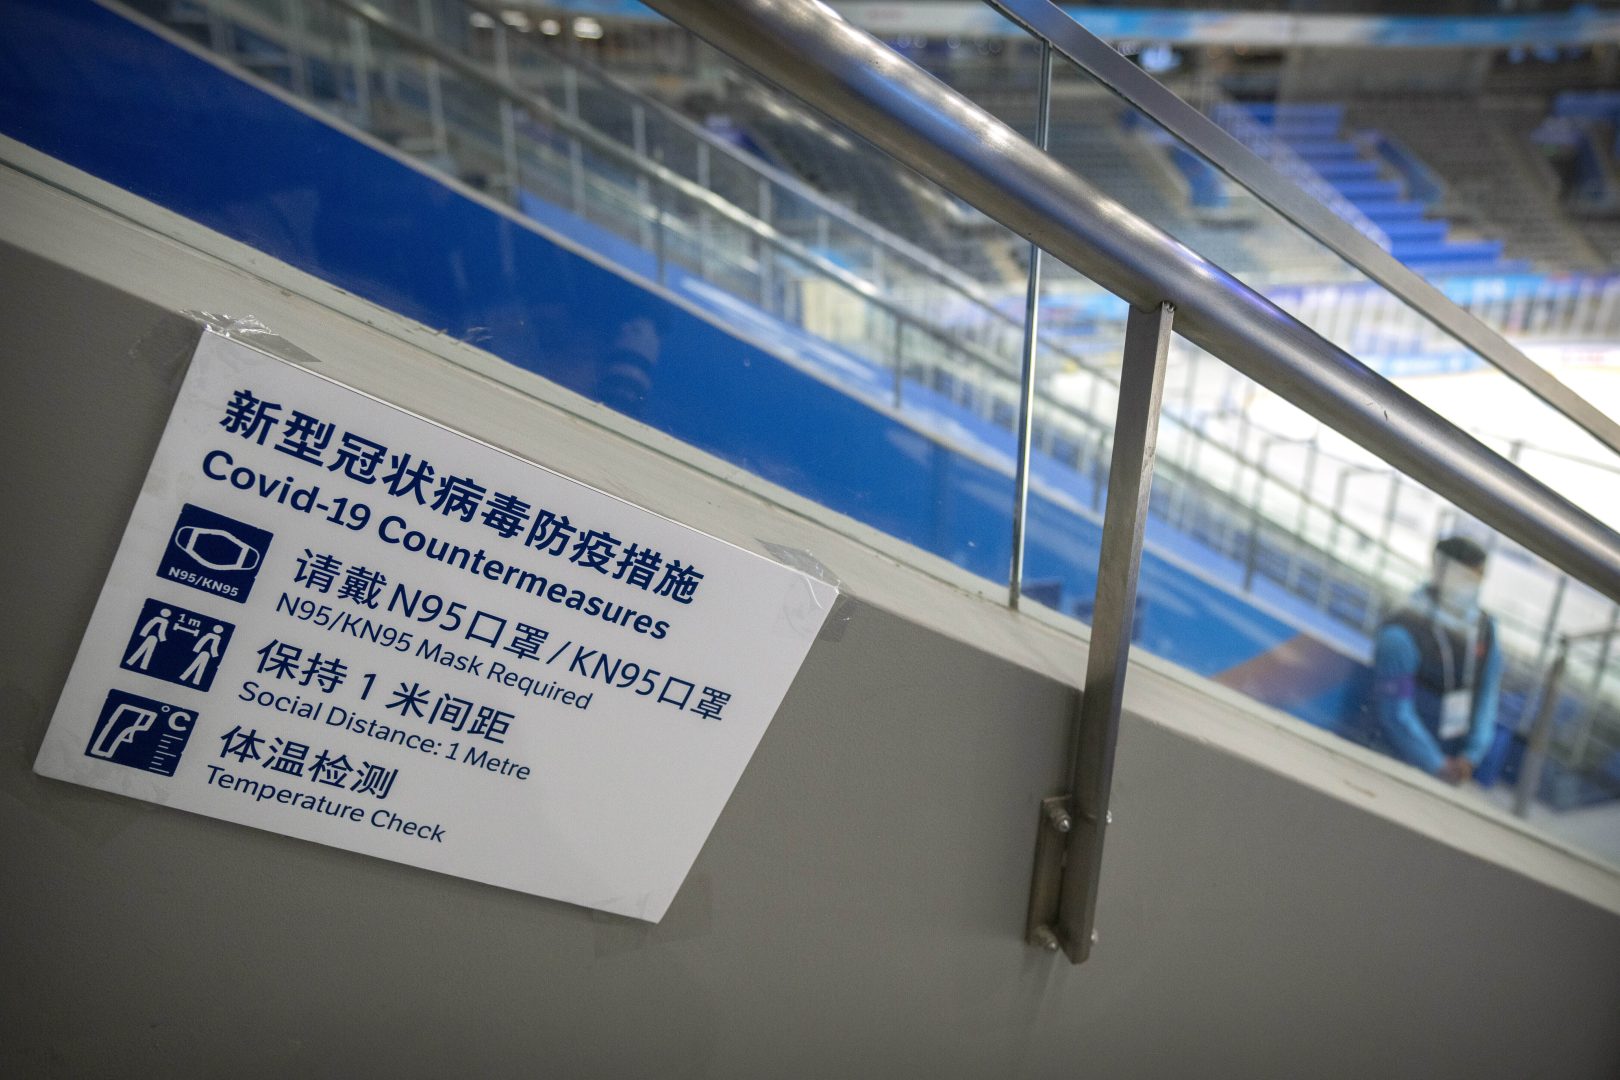 FILE - A staff member stands near a sign outlining COVID-19 protection measures during the Experience Beijing Ice Hockey Domestic Test Activity, a test event for the 2022 Beijing Winter Olympics, at the National Indoor Stadium in Beijing, on Nov. 10, 2021.  The prevention protocols will be similar to those at the Tokyo Games this summer, but tighter. It won't be a stretch for Beijing organizers, with China having maintained its zero-tolerance policy to the virus nationally since early in the pandemic. (AP Photo/Mark Schiefelbein, File)